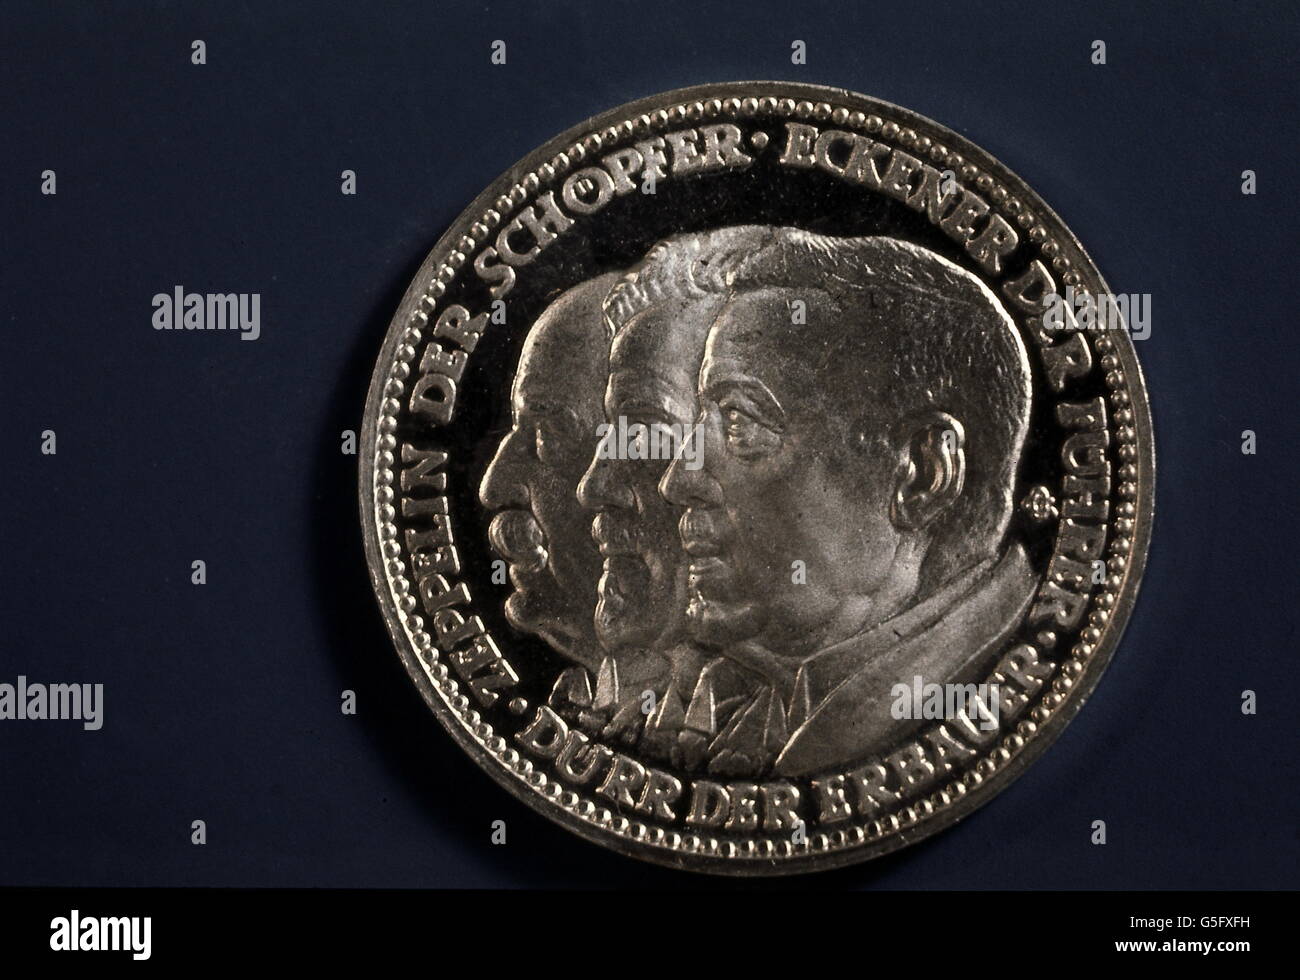 money / finance, coin, Germany, commemorative coin, 1st world flight of the airship 'Graf Zeppelin', 1929, silver, with portraits of Ferdinand Graf Zeppelin, Dr. Hugo Eckener  & Ludwig Dürr, , Additional-Rights-Clearences-Not Available Stock Photo